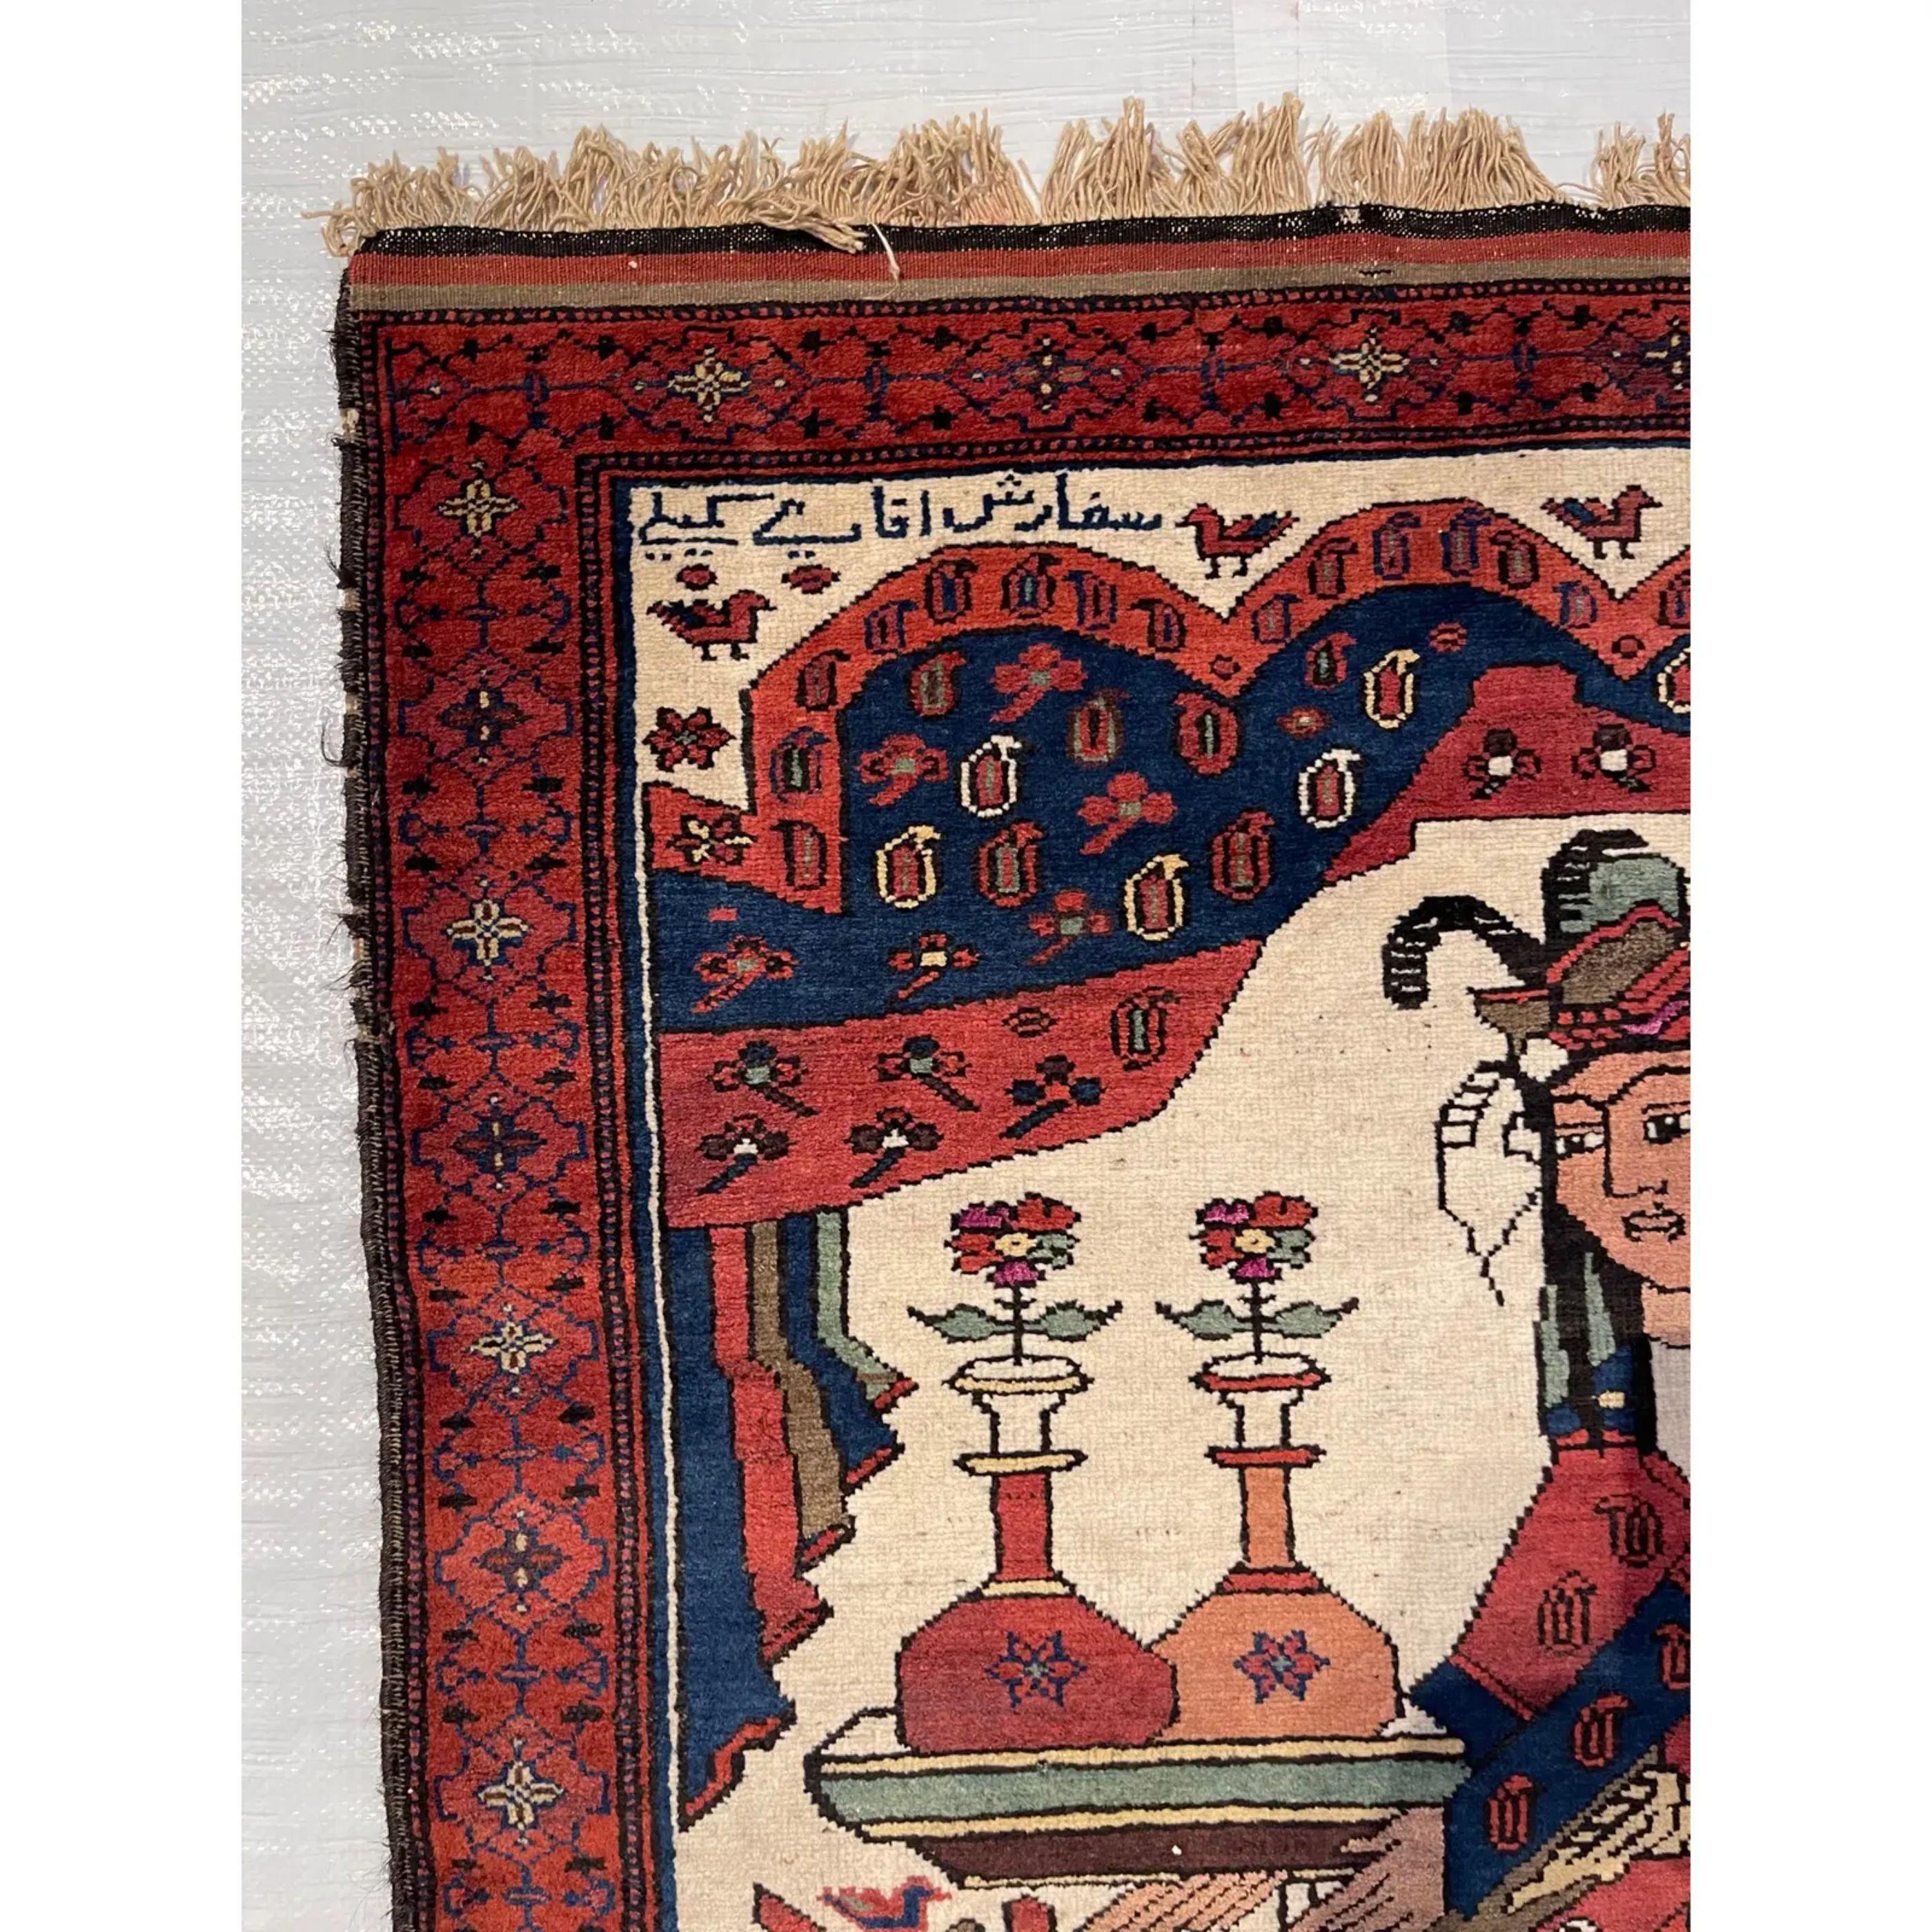 Antique Baloutch Rug Made for a Noble Man 4'11'' X 3', handmade and hand-knotted, inspired by the story of beauty and the beast  

